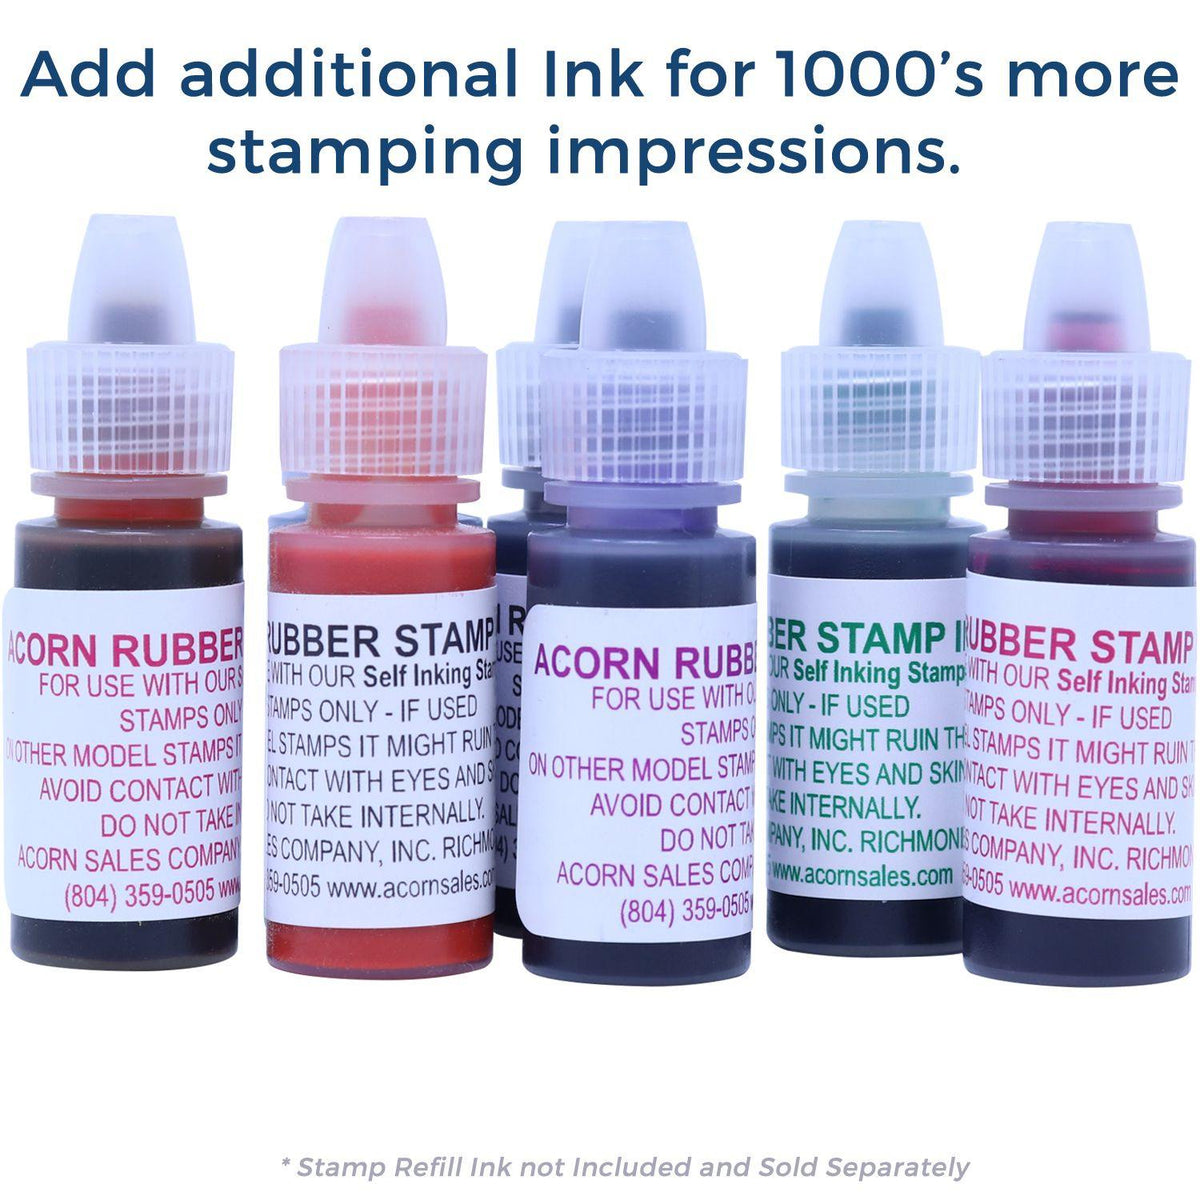 Refill Inks for Large Pre-Inked Muestra Stamp Available